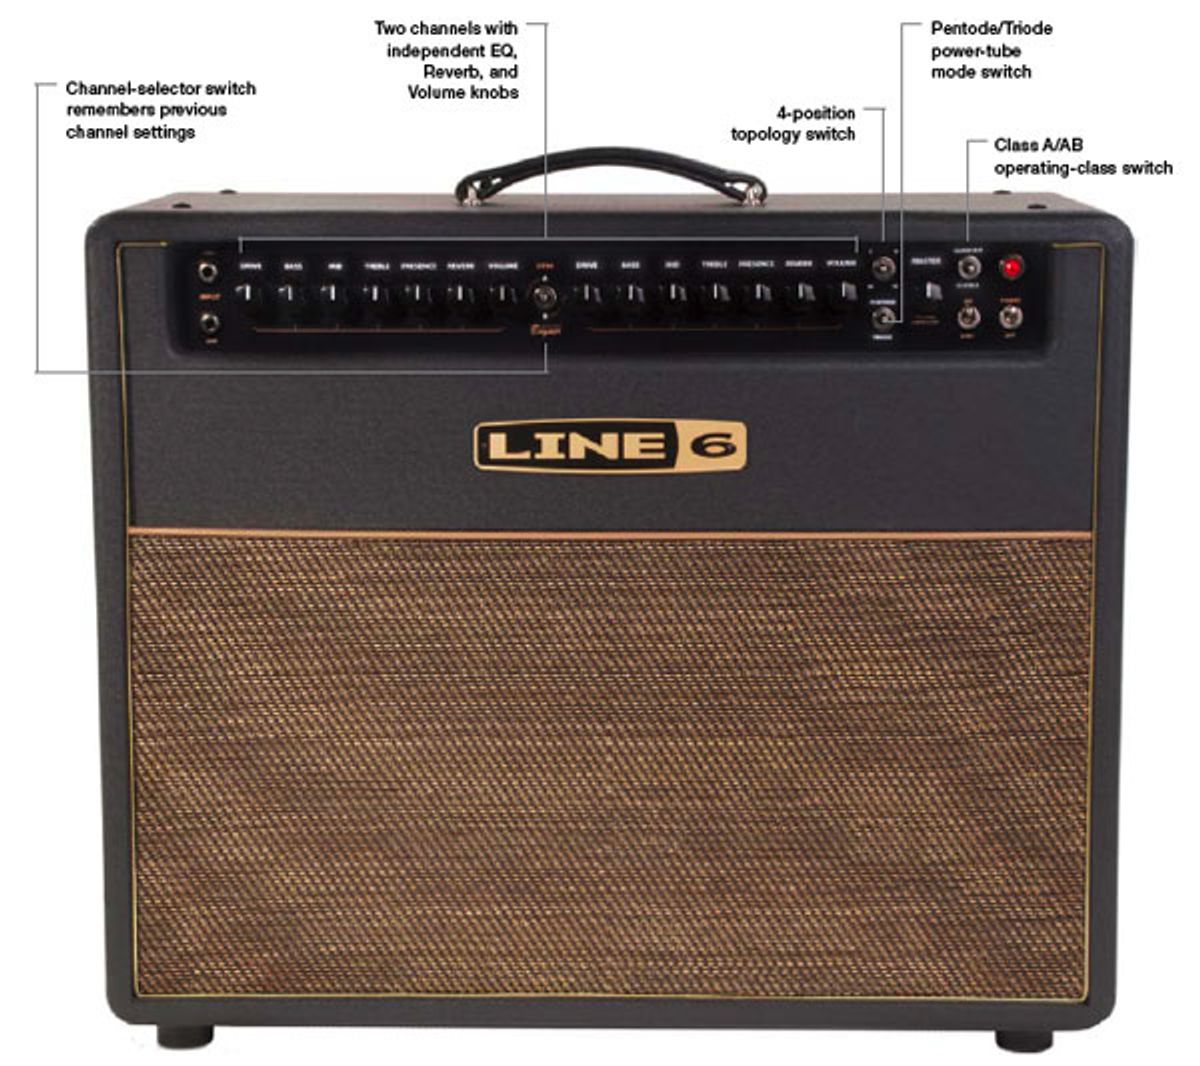 Line 6 DT50 112 Combo Amp Review